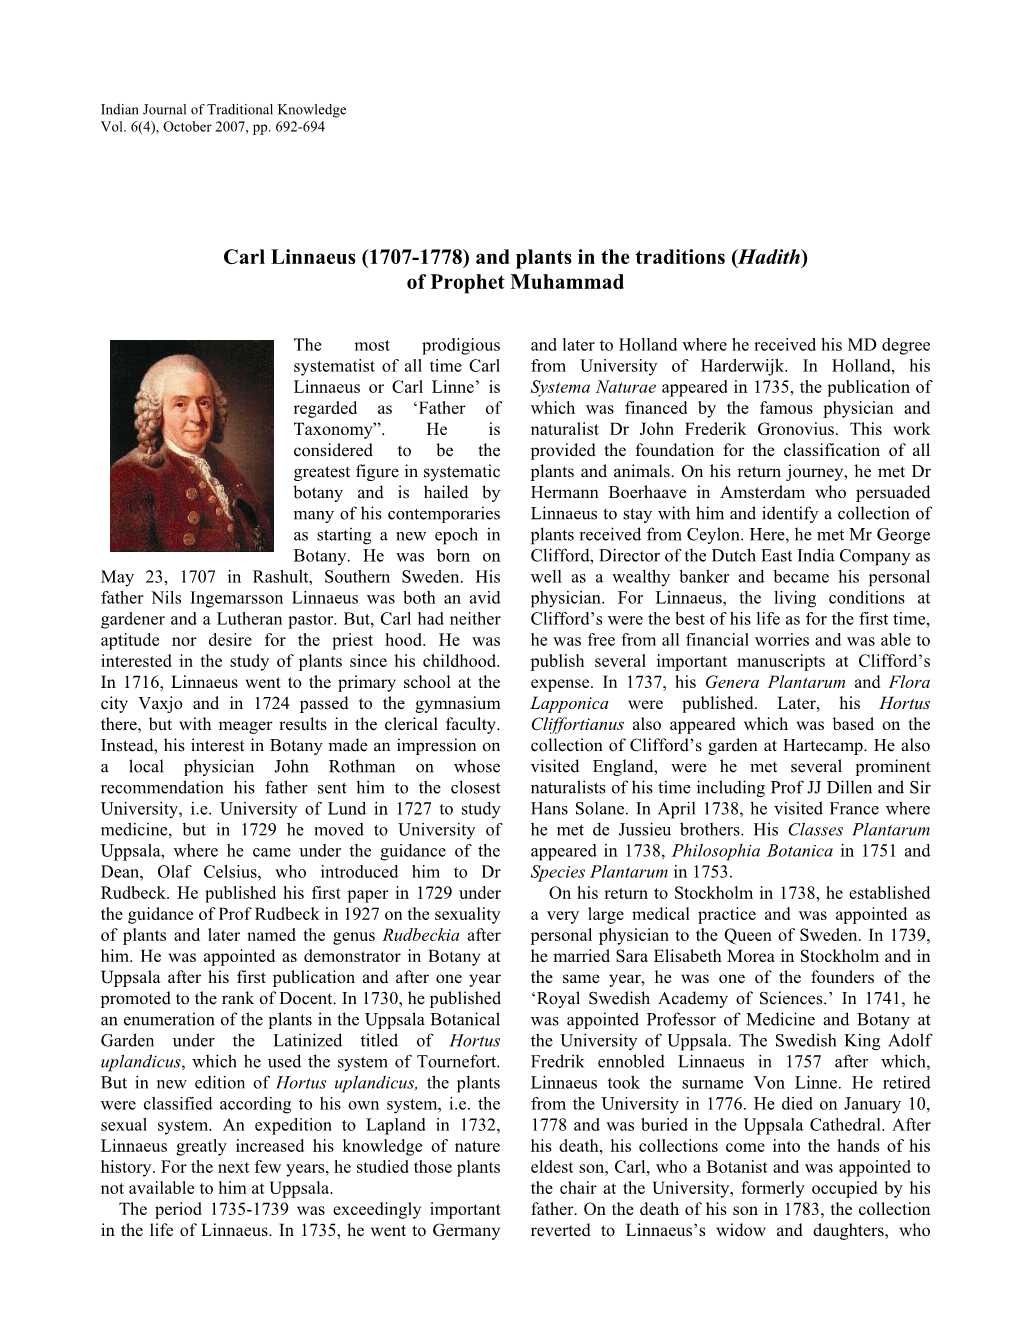 Carl Linnaeus (1707-1778) and Plants in the Traditions (Hadith) of Prophet Muhammad